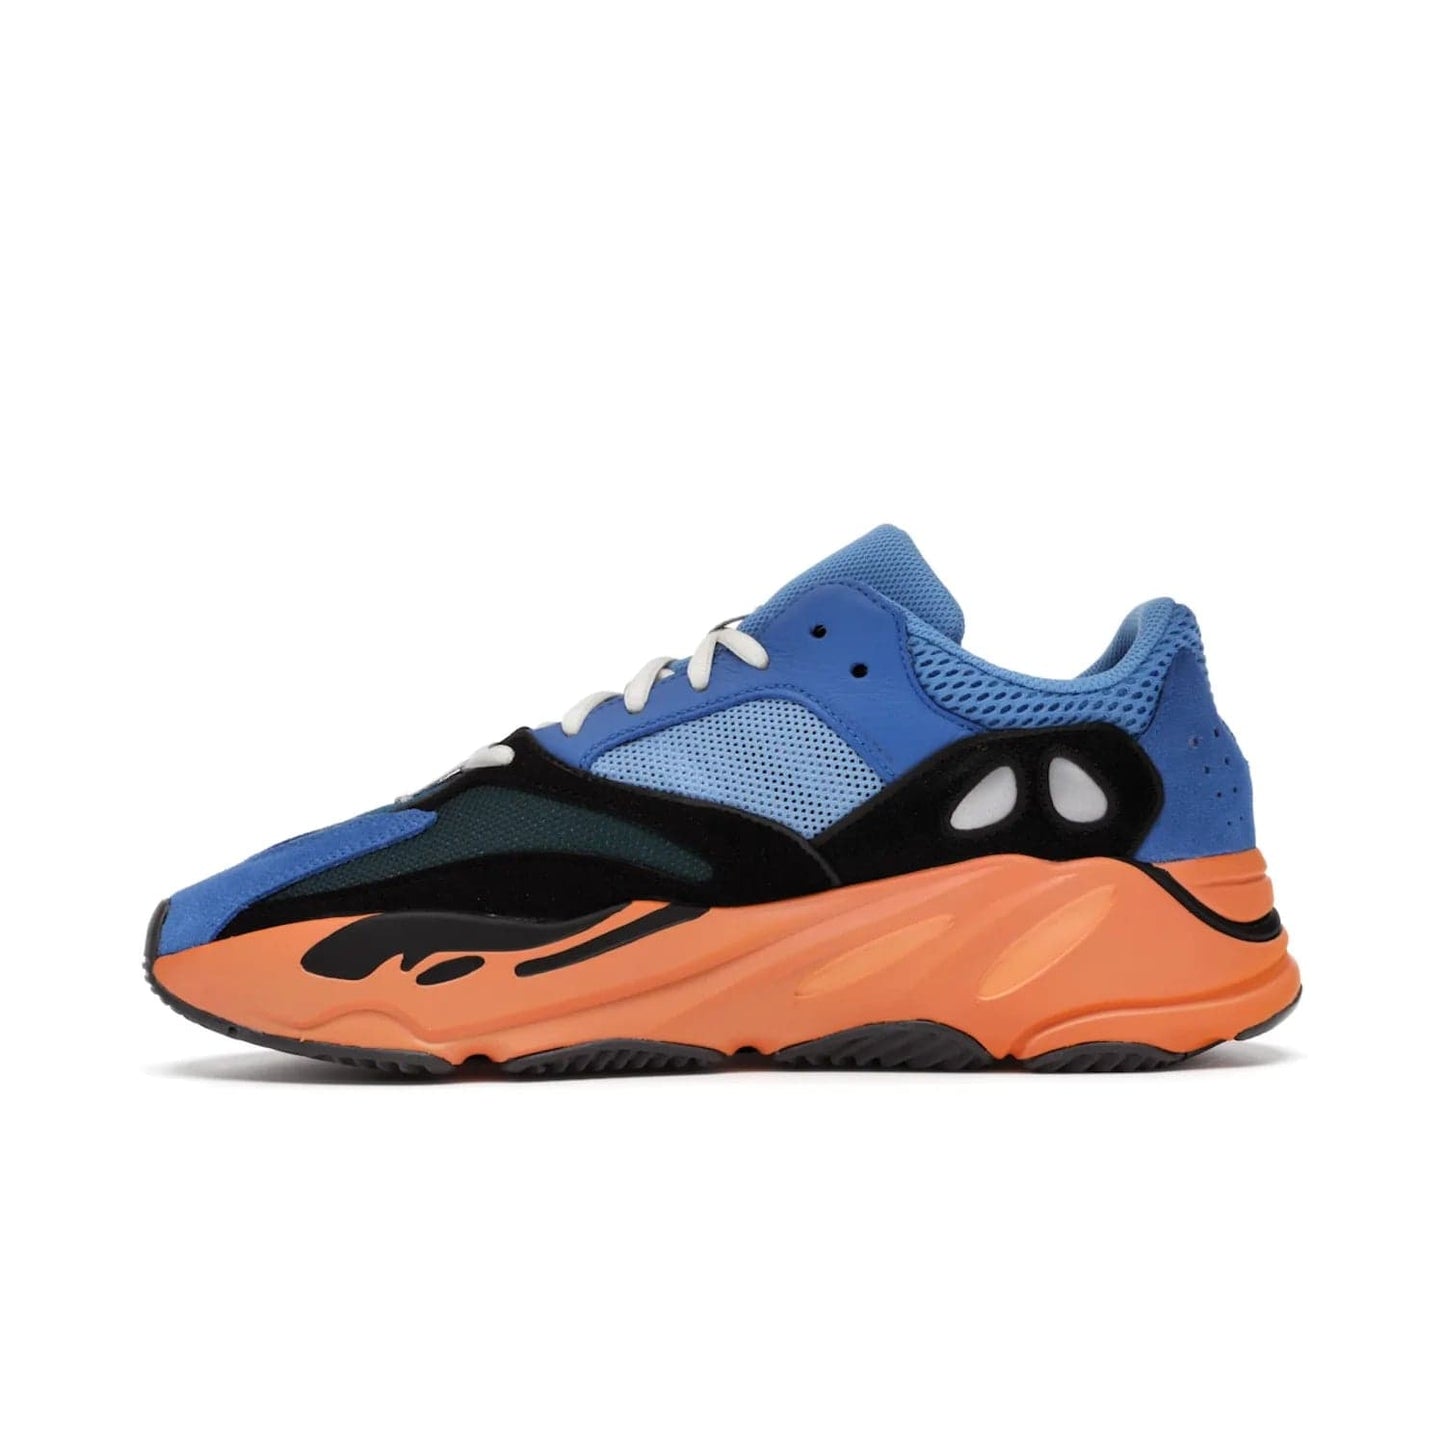 adidas Yeezy Boost 700 Bright Blue - Image 19 - Only at www.BallersClubKickz.com - Iconic sneaker style meets vibrant colour with the adidas Yeezy Boost 700 Bright Blue. Reflective accents, turquoise and teal panels, bright orange midsole and black outsole make for a bold release. April 2021.